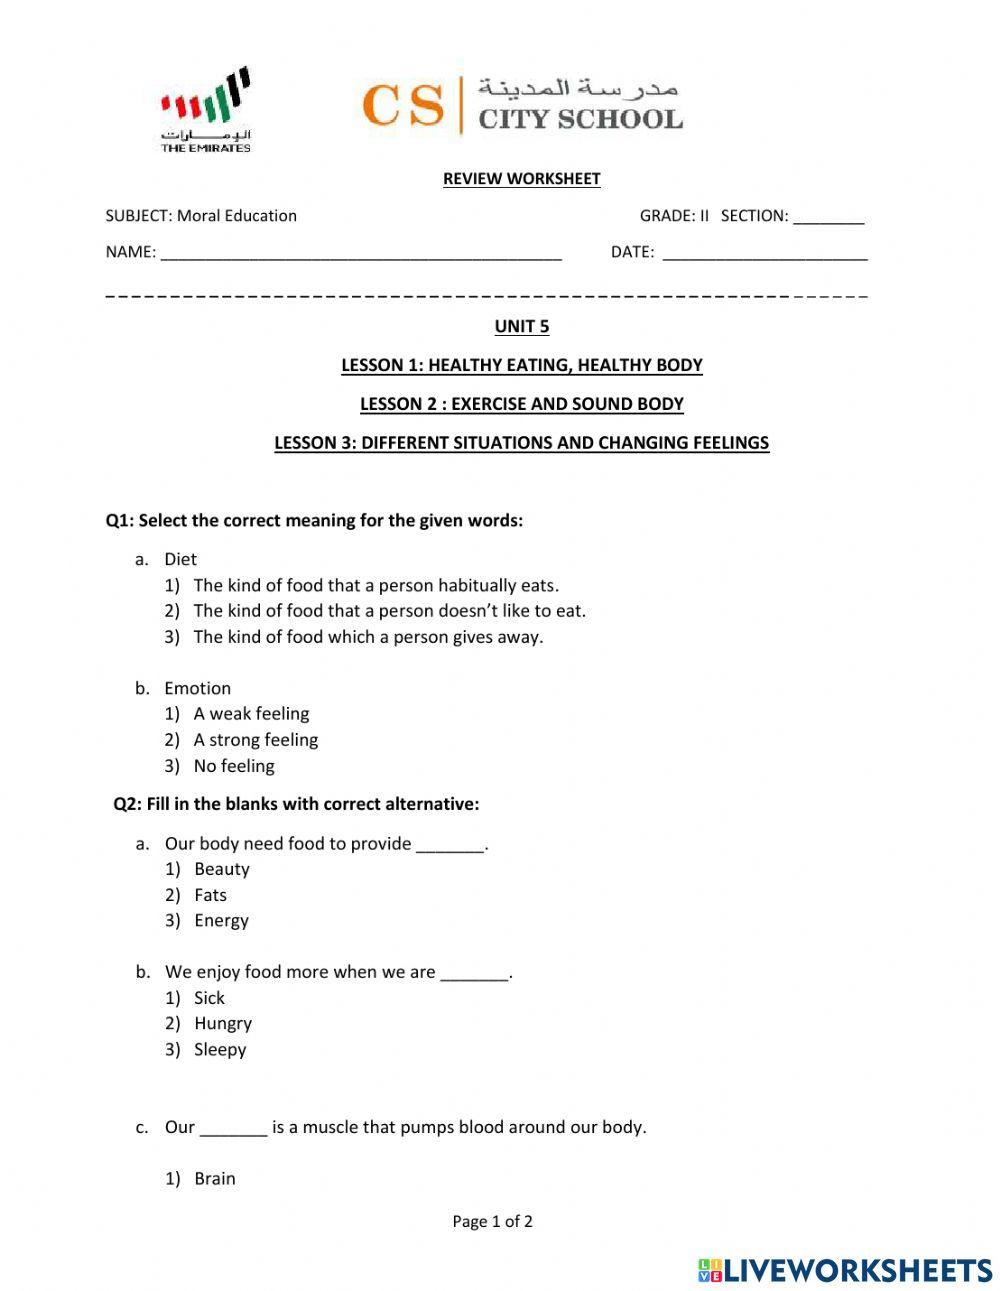 Review Worksheet Unit 5: Lesson 1, 2 and 3